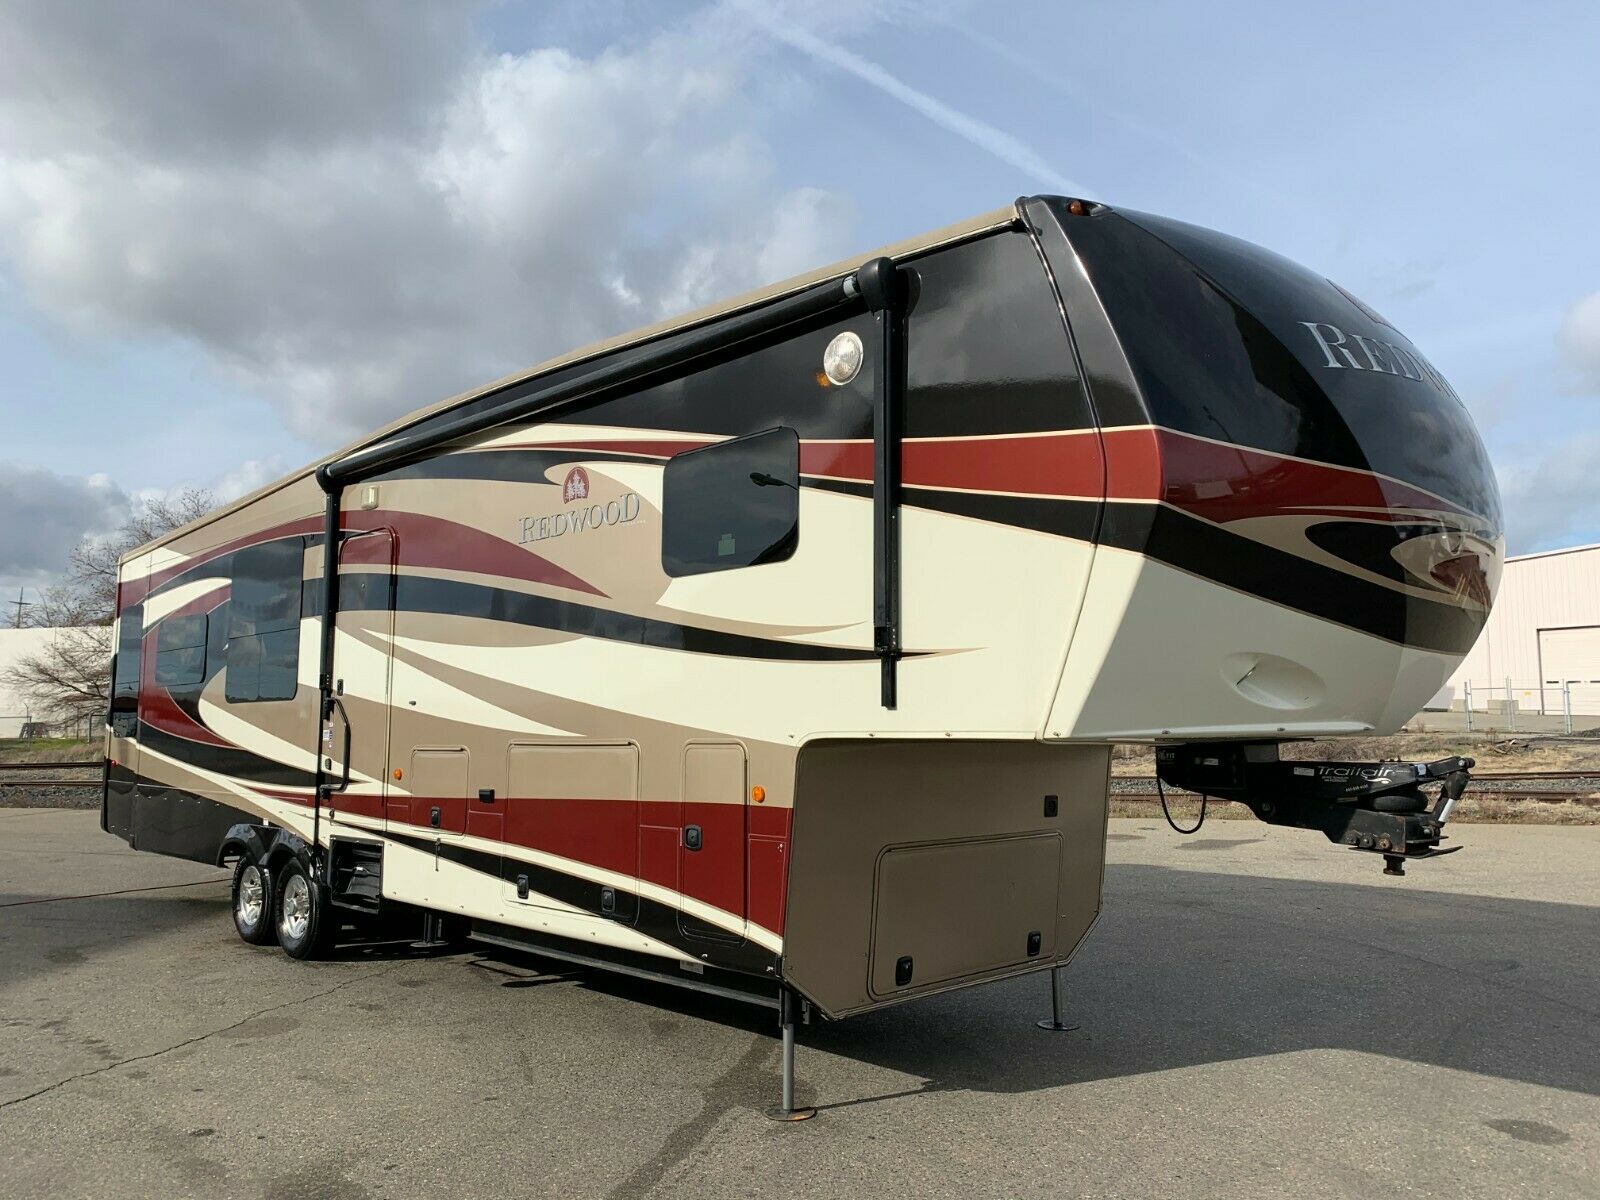 2012 REDWOOD 36RL LUXURY RV FIFTH WHEEL TRAILER "3 SLIDES" FULL TIME 5th Wheel Camper With 3 Slide Outs